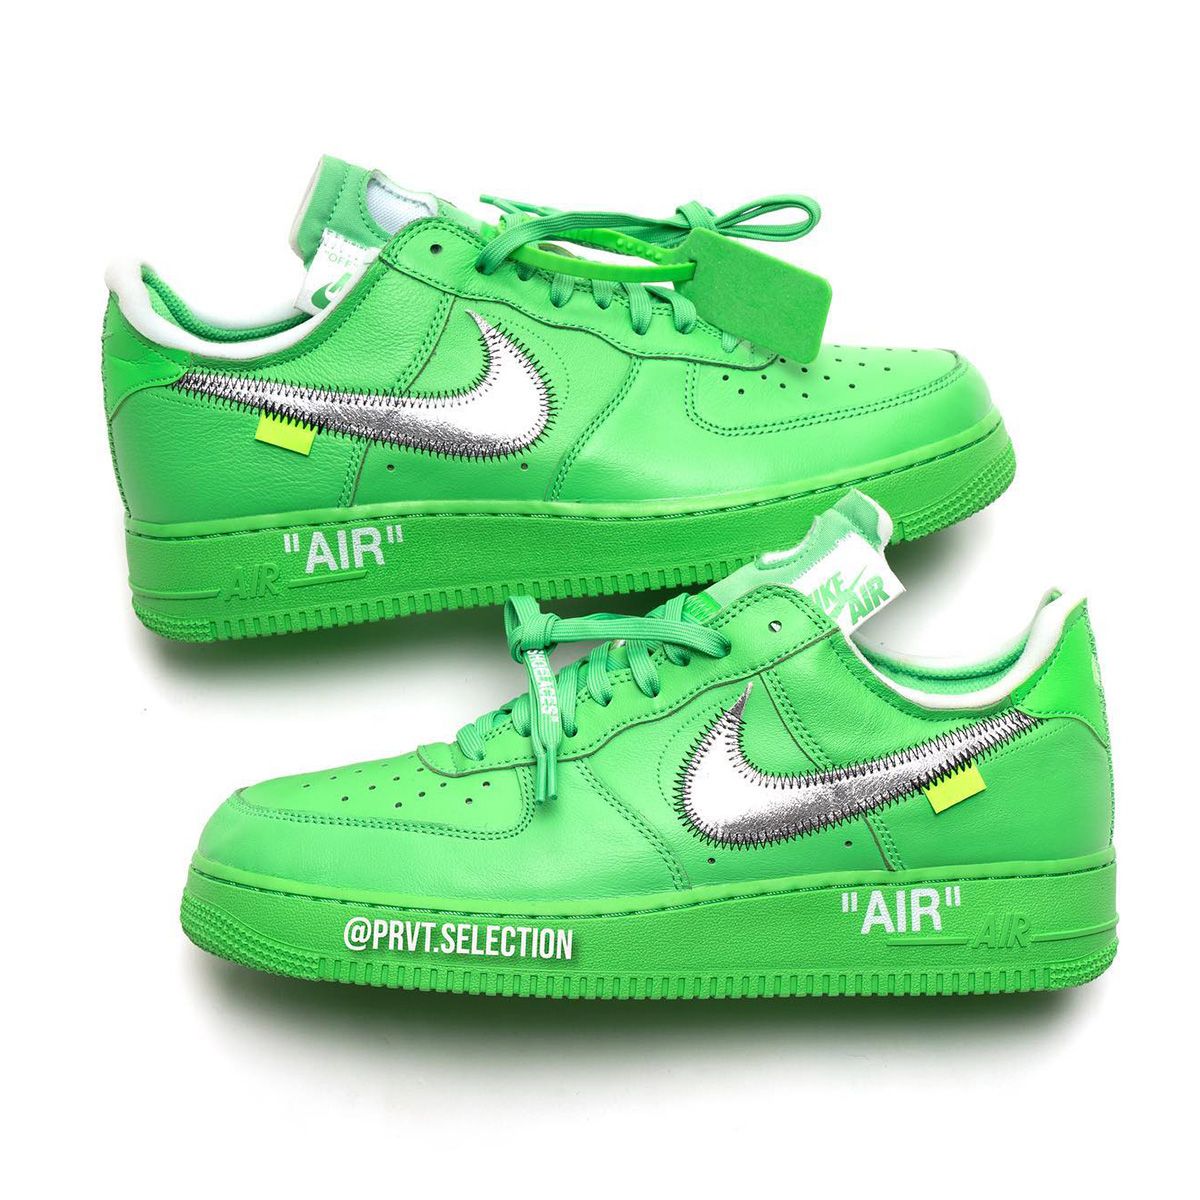 Where to Buy the OFF-WHITE x Nike Air Force 1 Low 